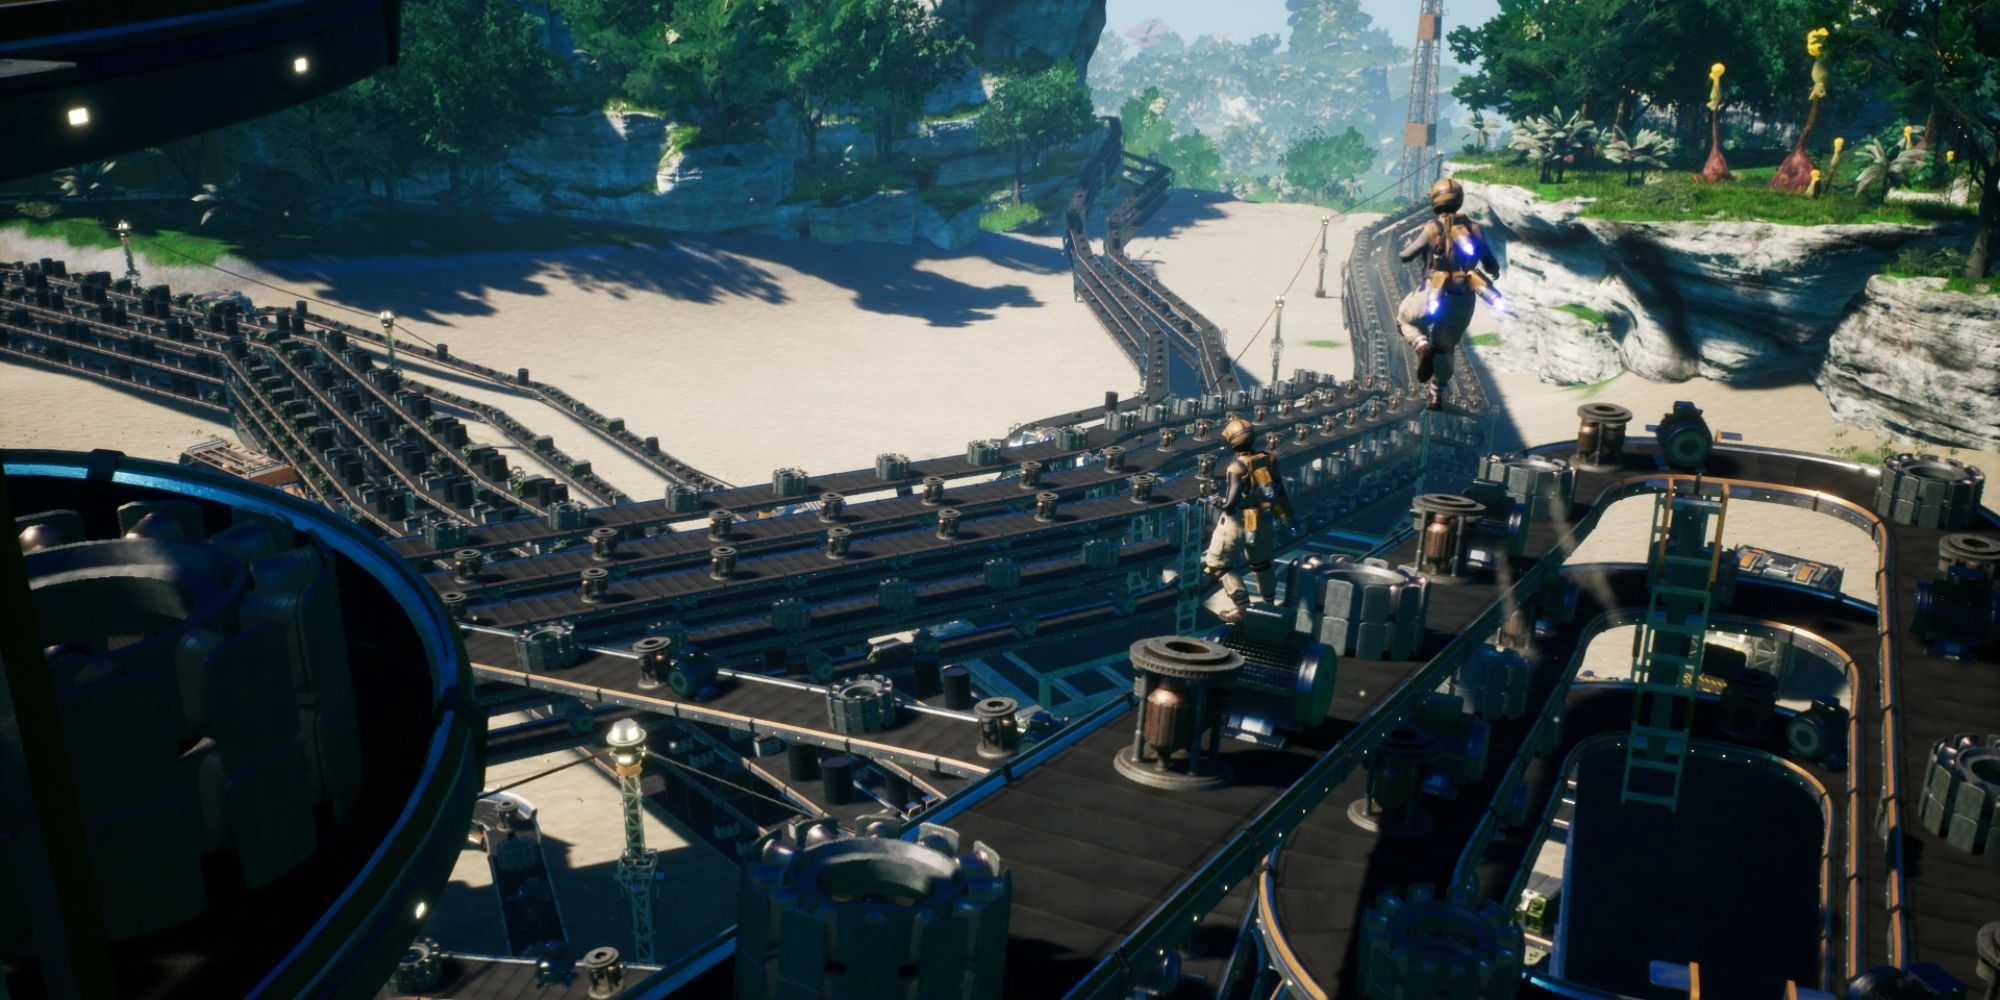 Two players look over the vast amount of conveyor belts they are surrounded by